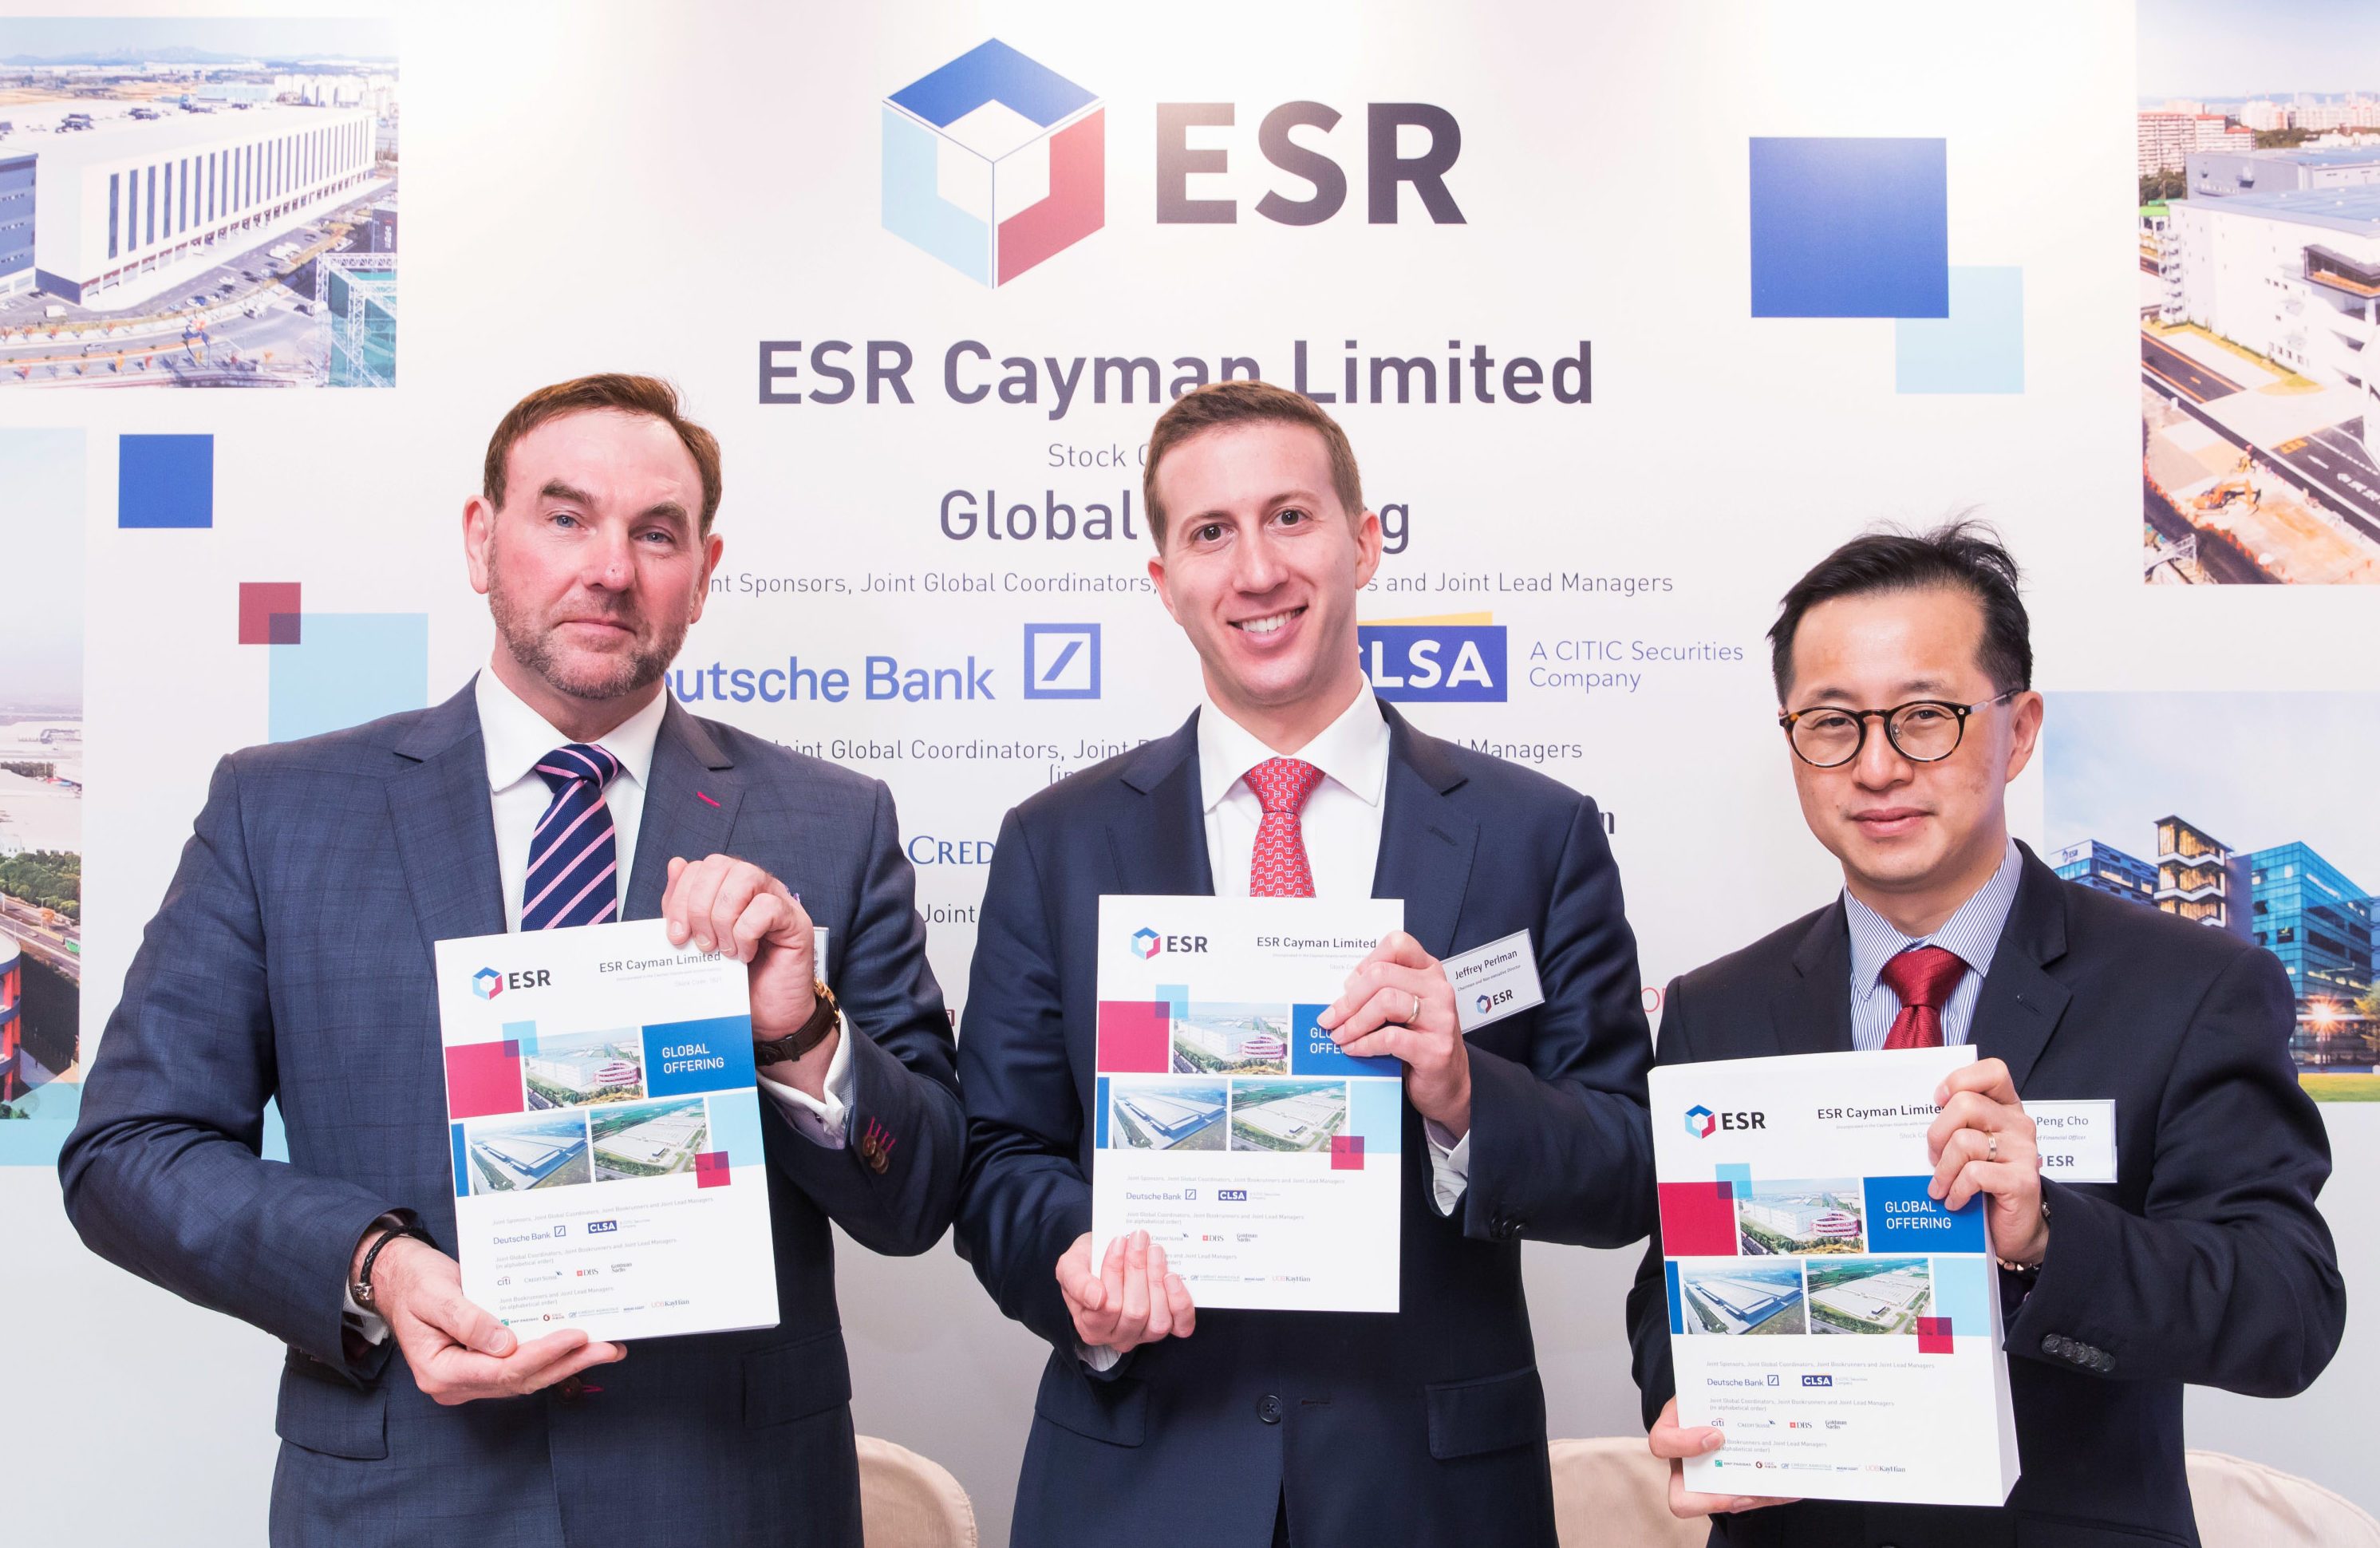 Warburg Pincus-backed ESR to raise up to $1.24b in HK's biggest IPO in 2019